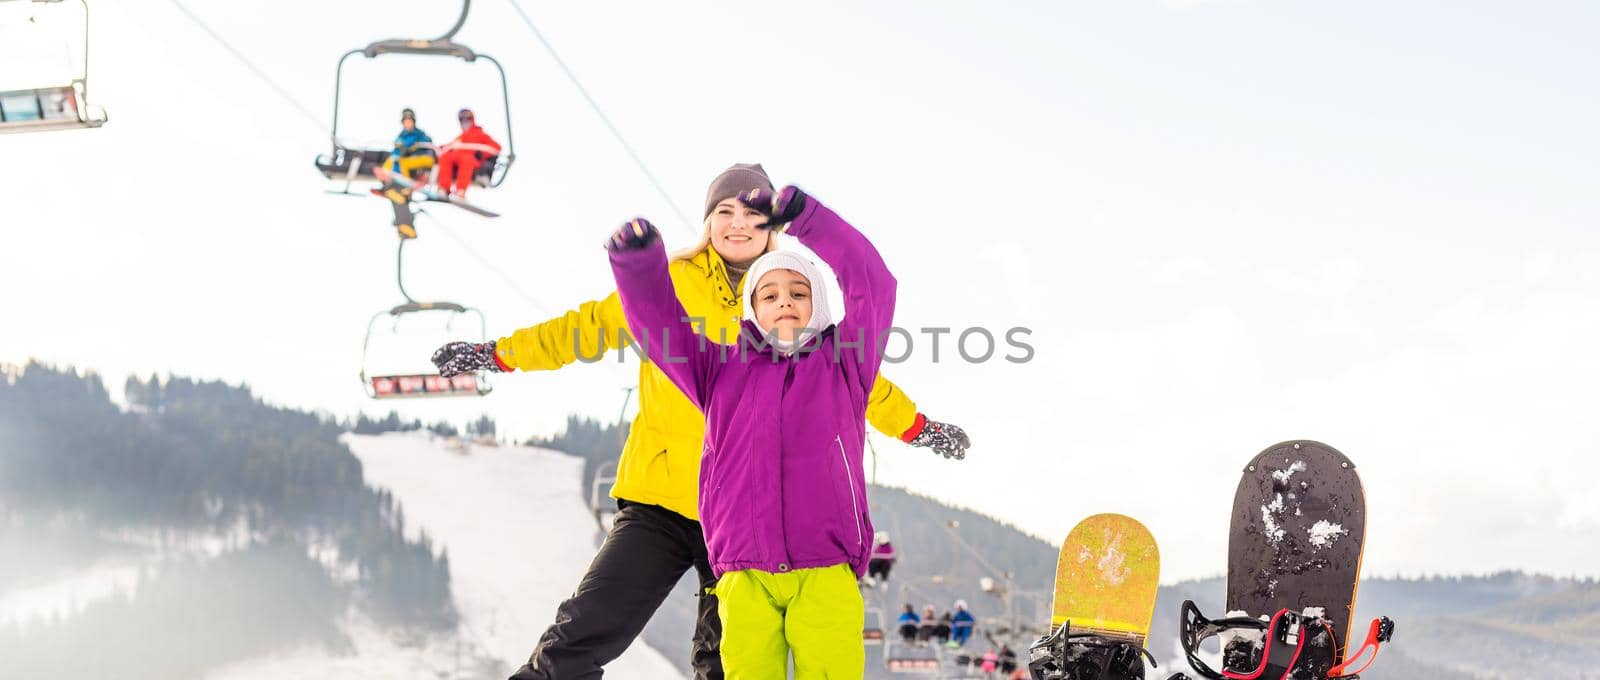 mother and daughter with snowboards at winter resort by Andelov13